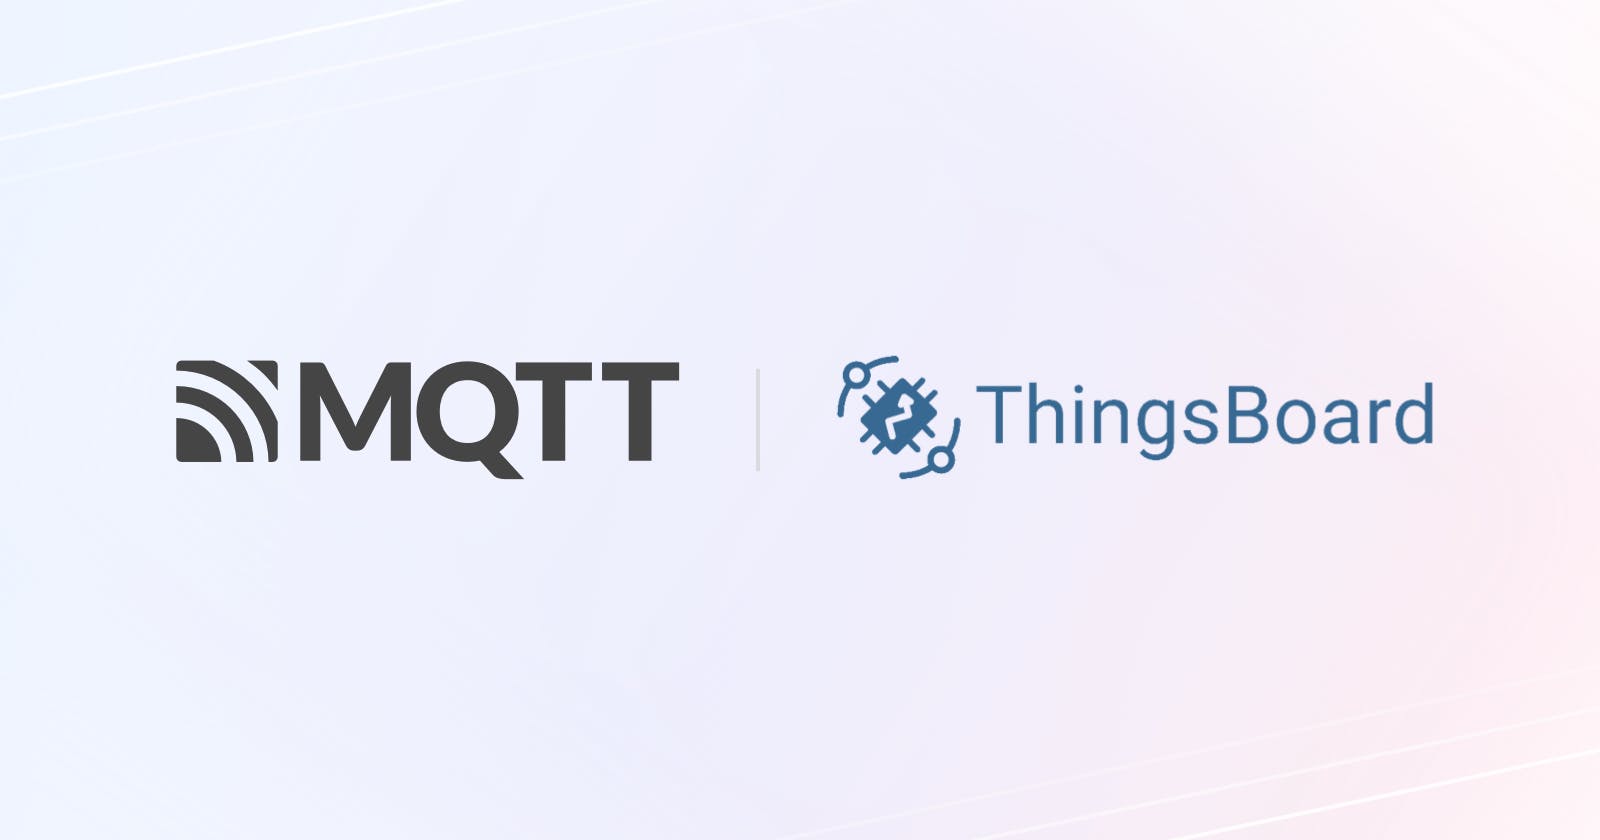 How to Access MQTT Data with ThingsBoard